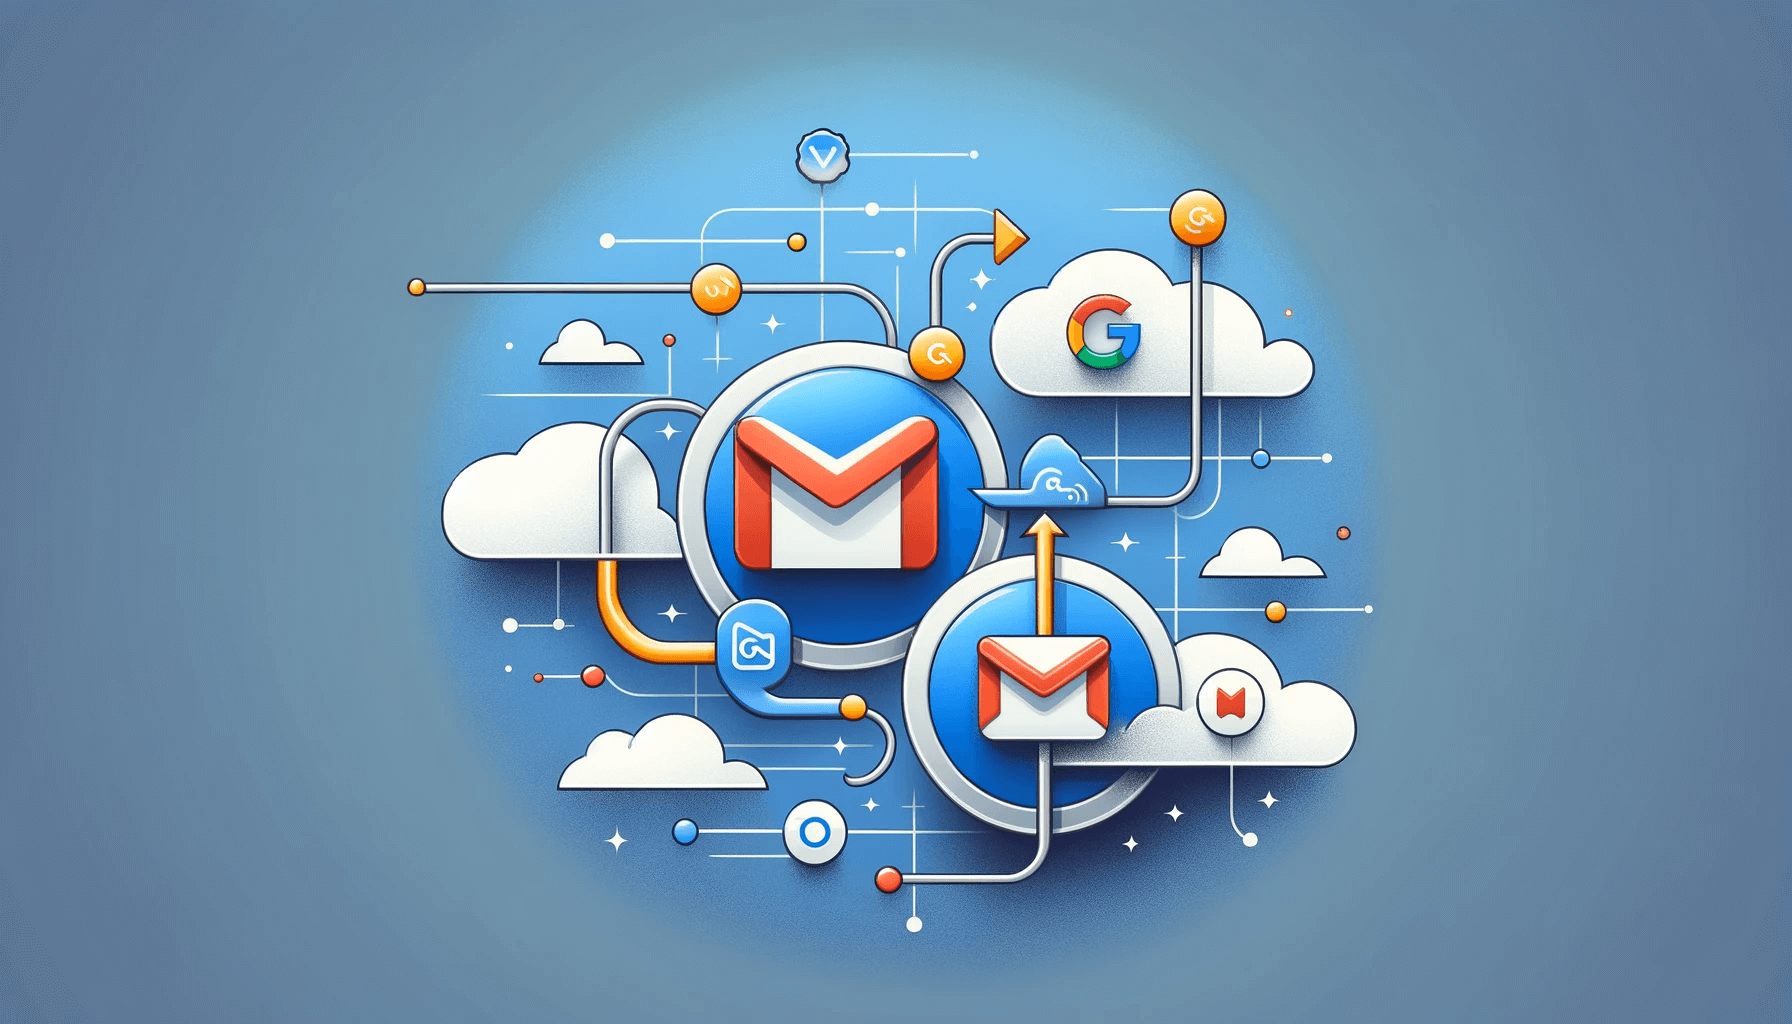 How to Add a Gmail Account to Outlook?